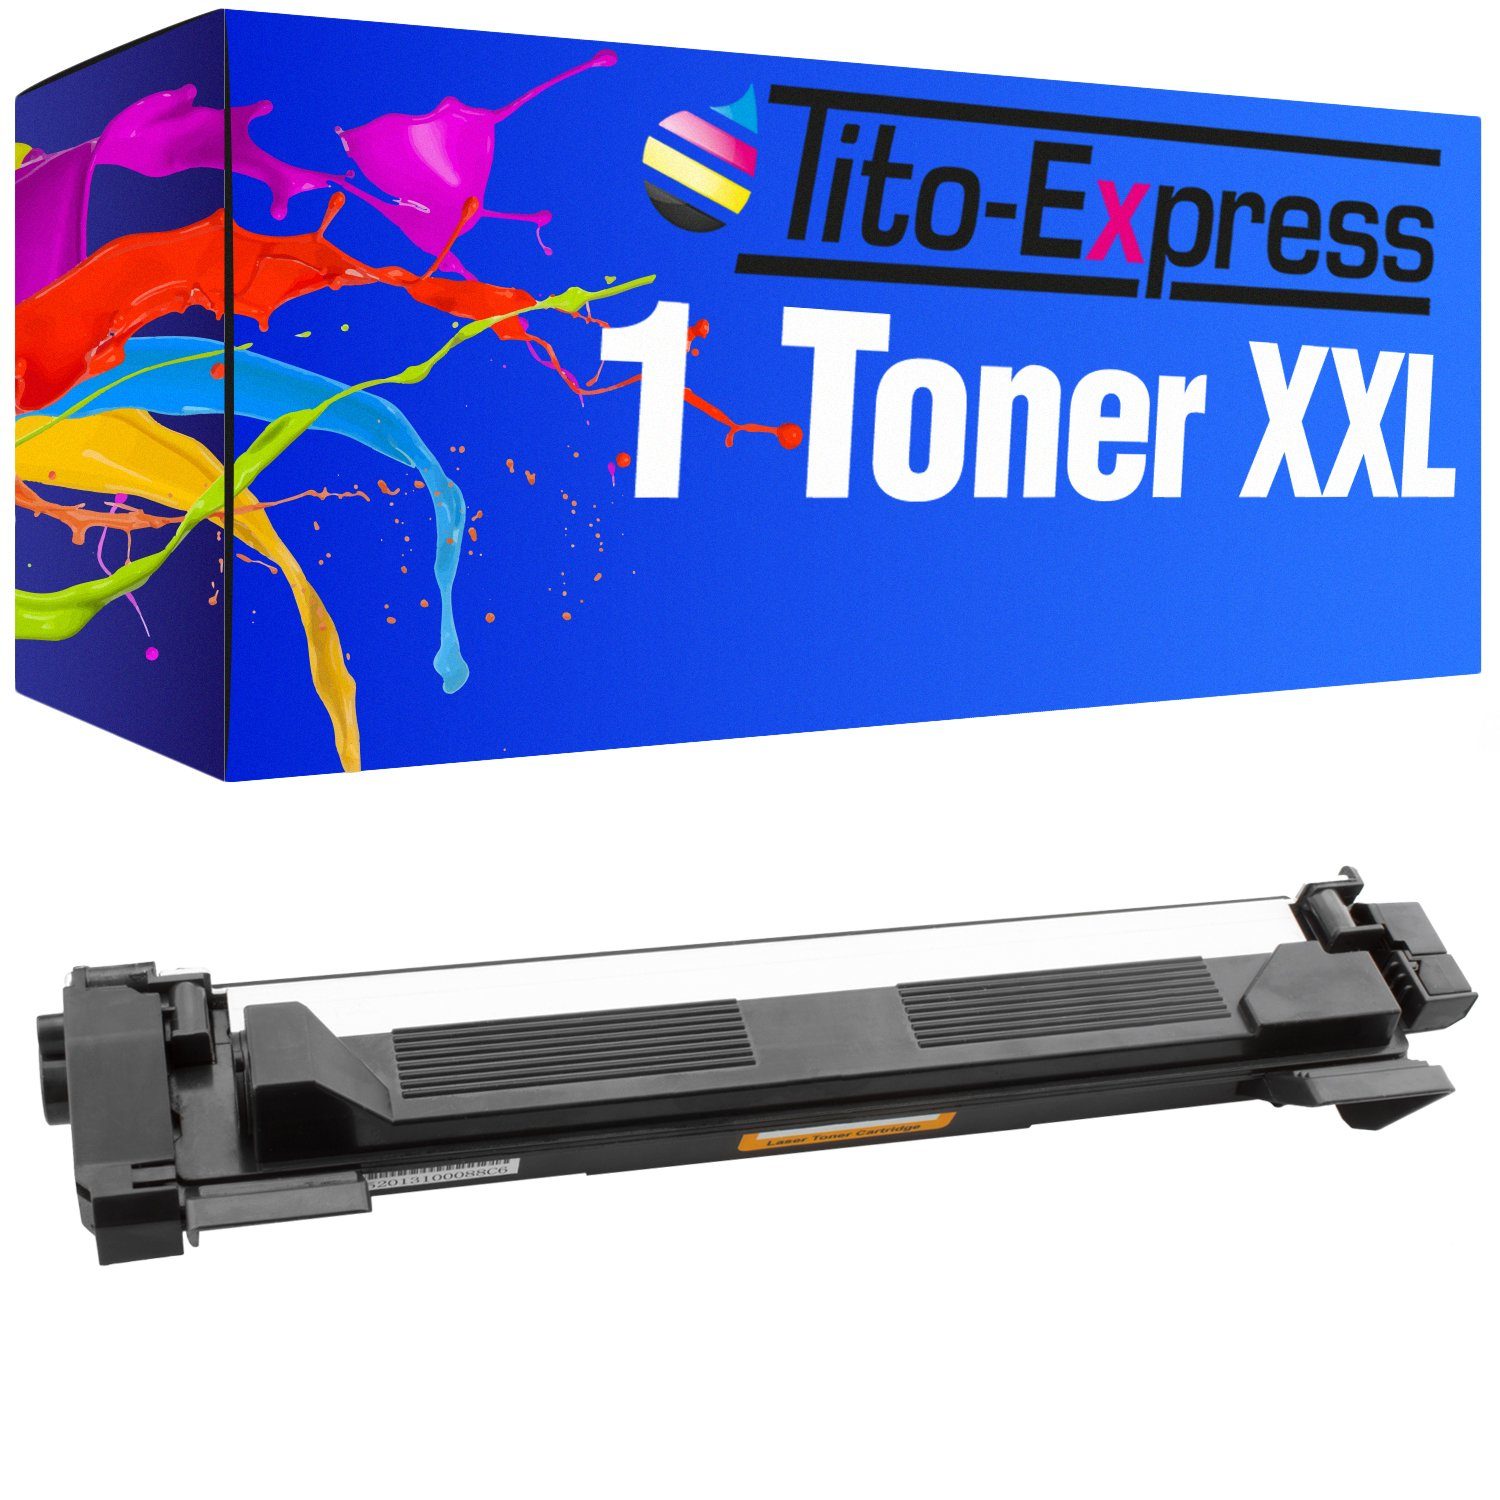 Tito-Express PlatinumSerie Tonerpatrone ersetzt Toner Brother TN-1050  Brother TN 1050 BrotherTN1050, (1x Black), für DCP-1510 DCP-1610W DCP-1612W  DCP-1512 MFC-1910W MFC-1810 HL-1110